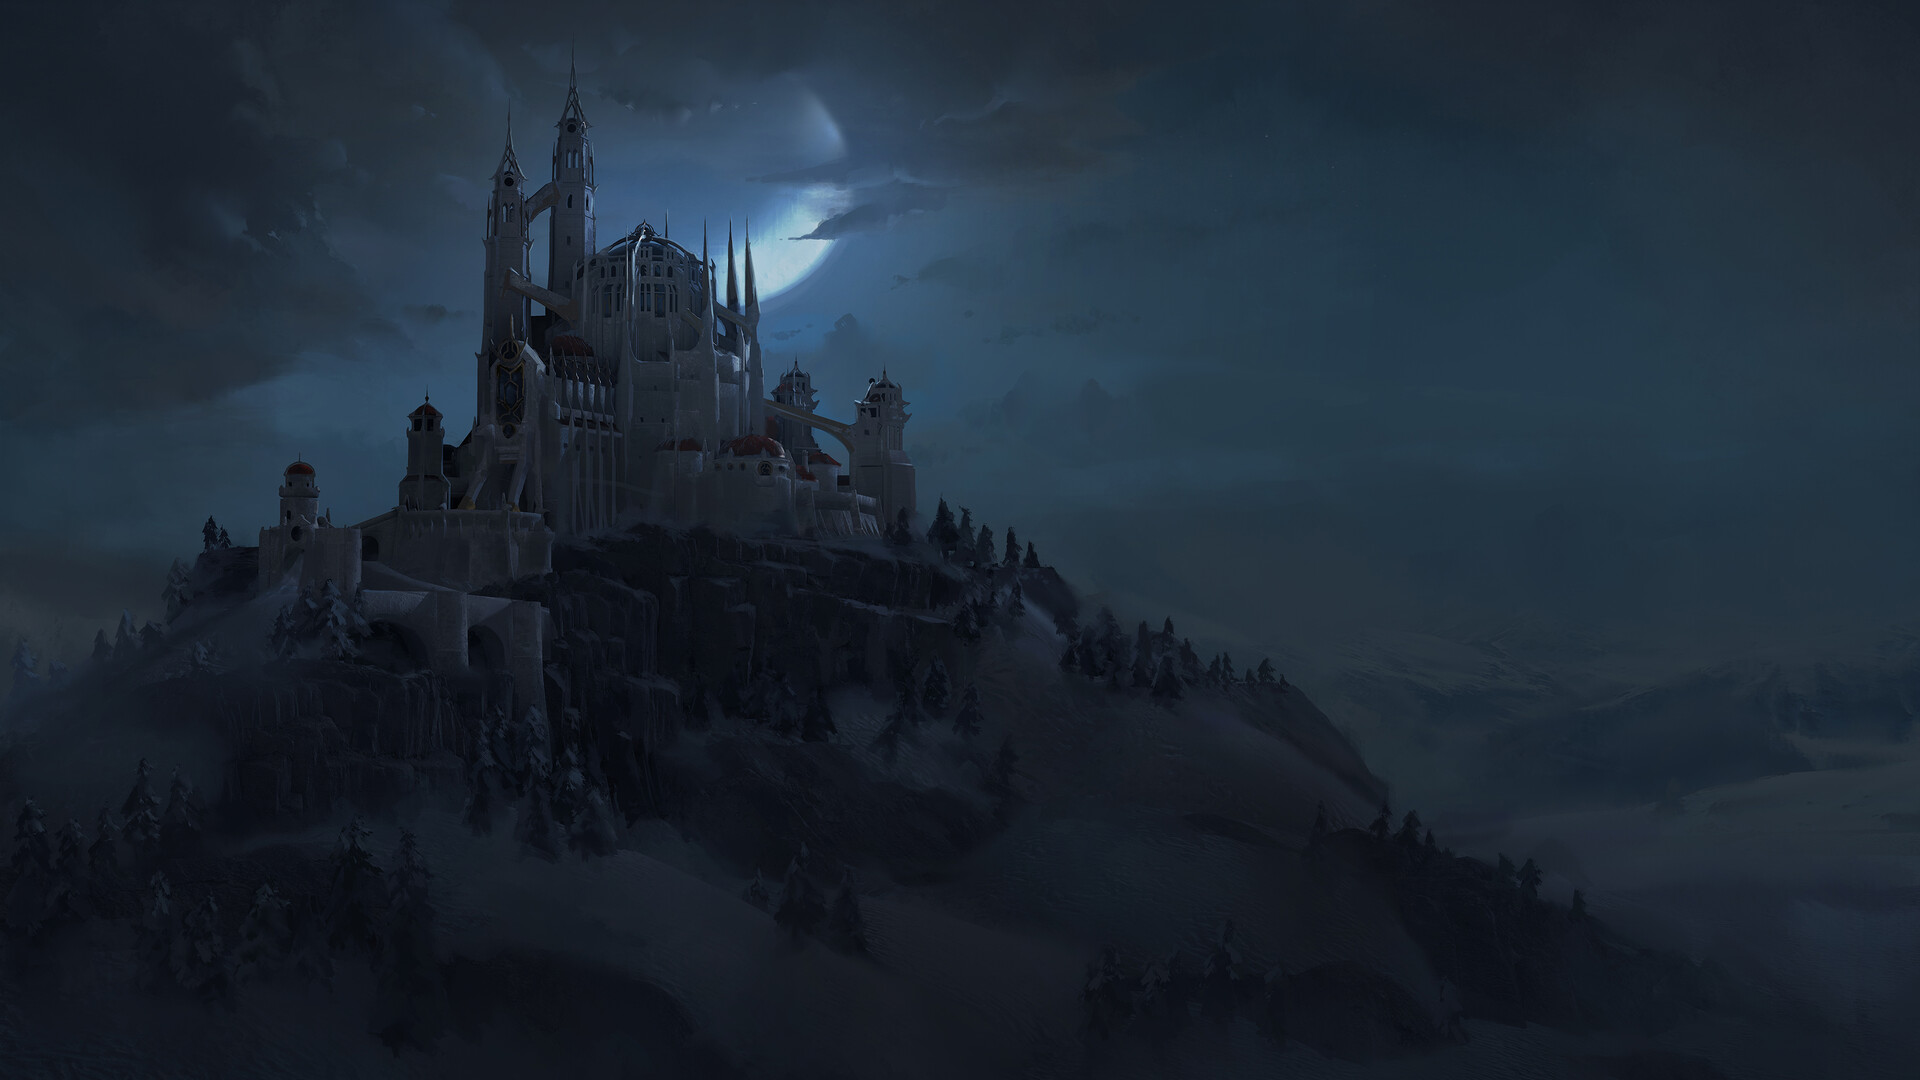 of backgrounds I painted for the Netflix Castlevania Season 3. Working as t...